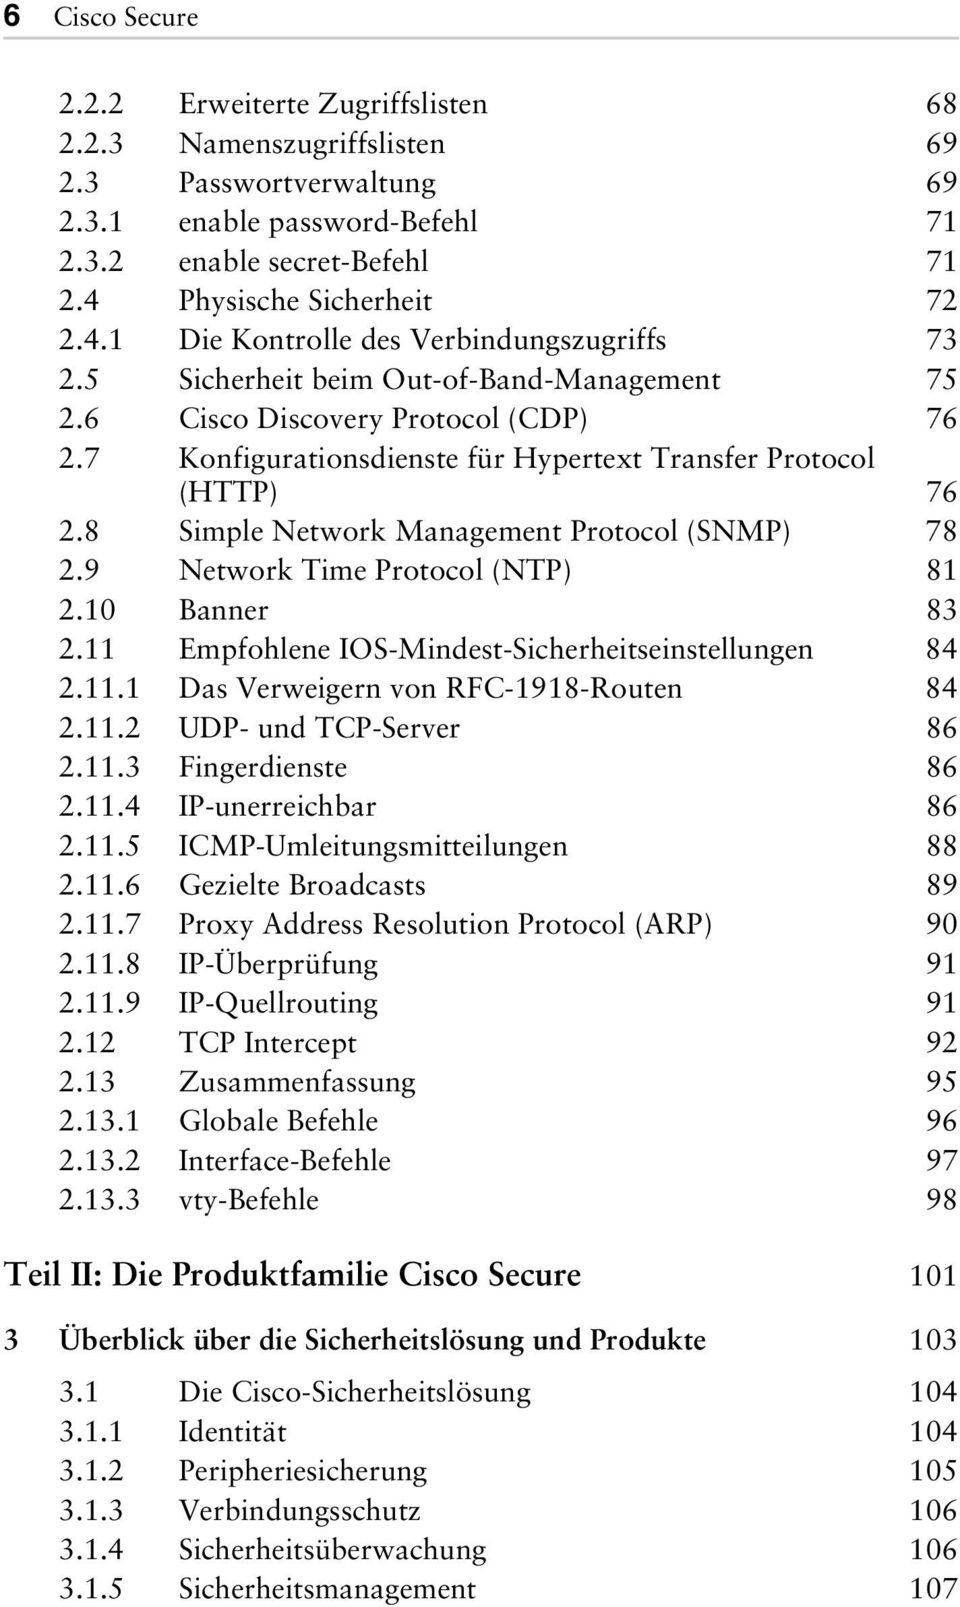 7 Konfigurationsdienste für Hypertext Transfer Protocol (HTTP) 76 2.8 Simple Network Management Protocol (SNMP) 78 2.9 Network Time Protocol (NTP) 81 2.10 Banner 83 2.